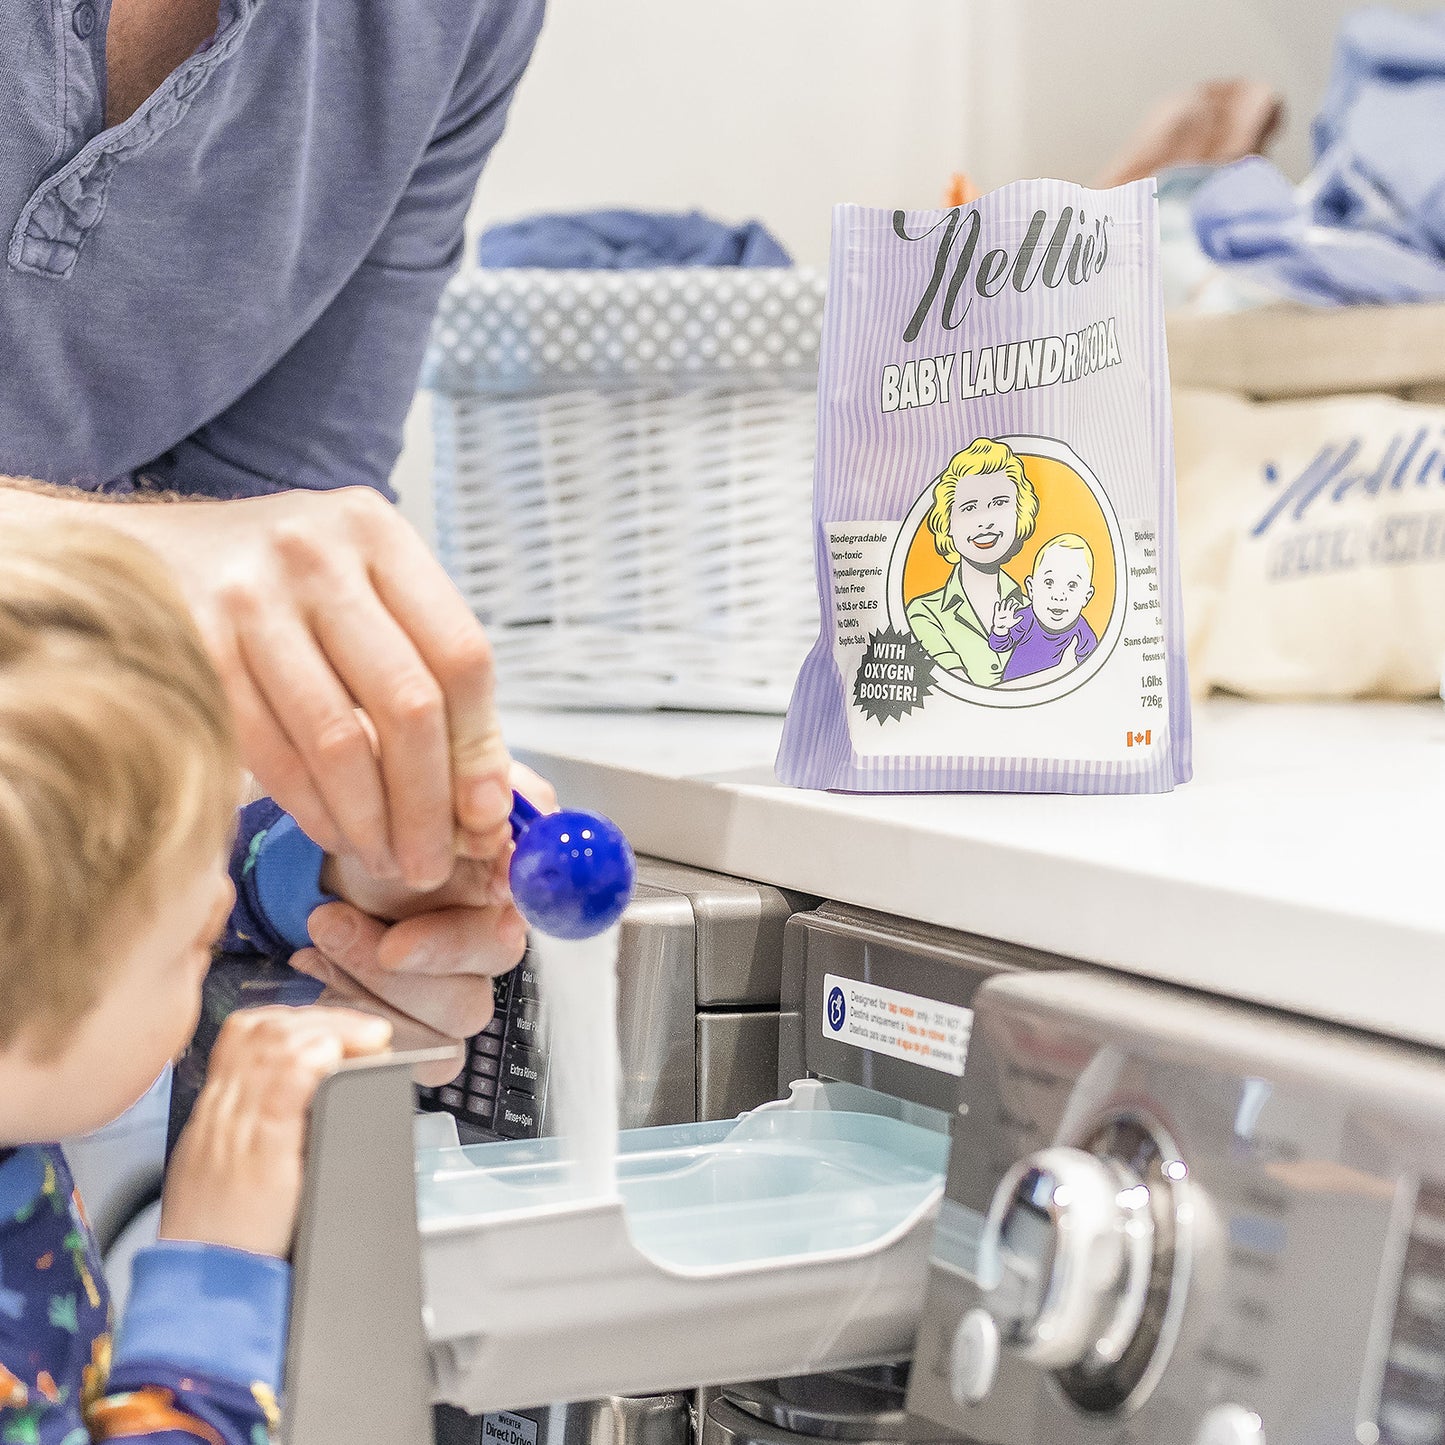 A father holding his son's hand while together pouring a scoop of Baby Laundry Soda into the Washing Machine Detergent Drawer